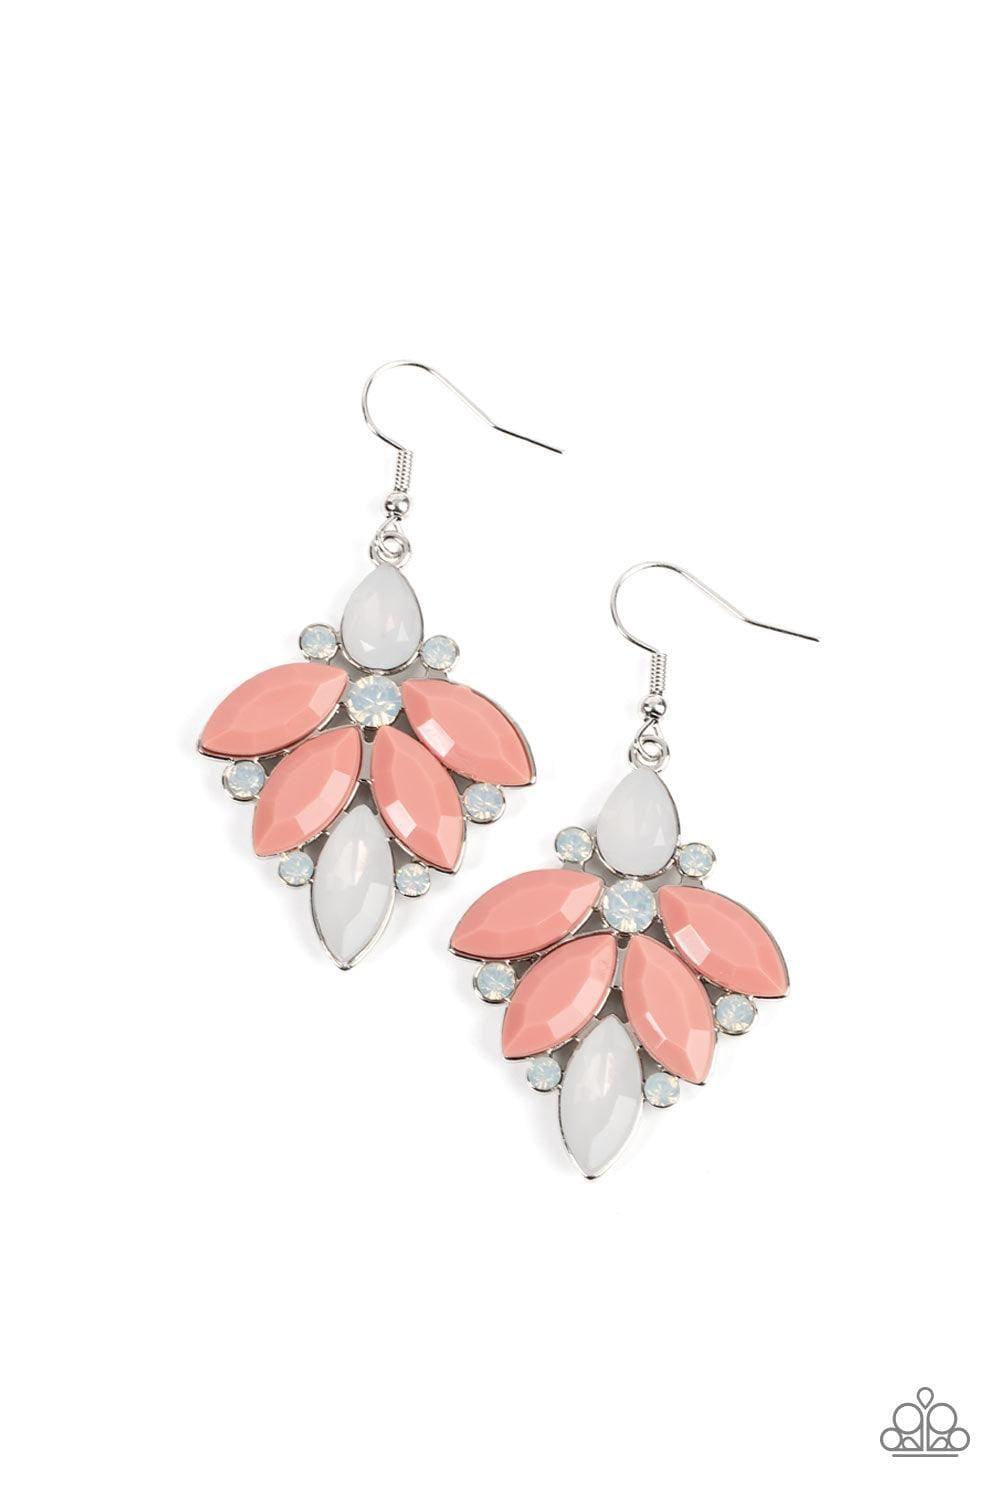 Paparazzi Accessories - Fantasy Flair - Pink Earrings - Bling by JessieK